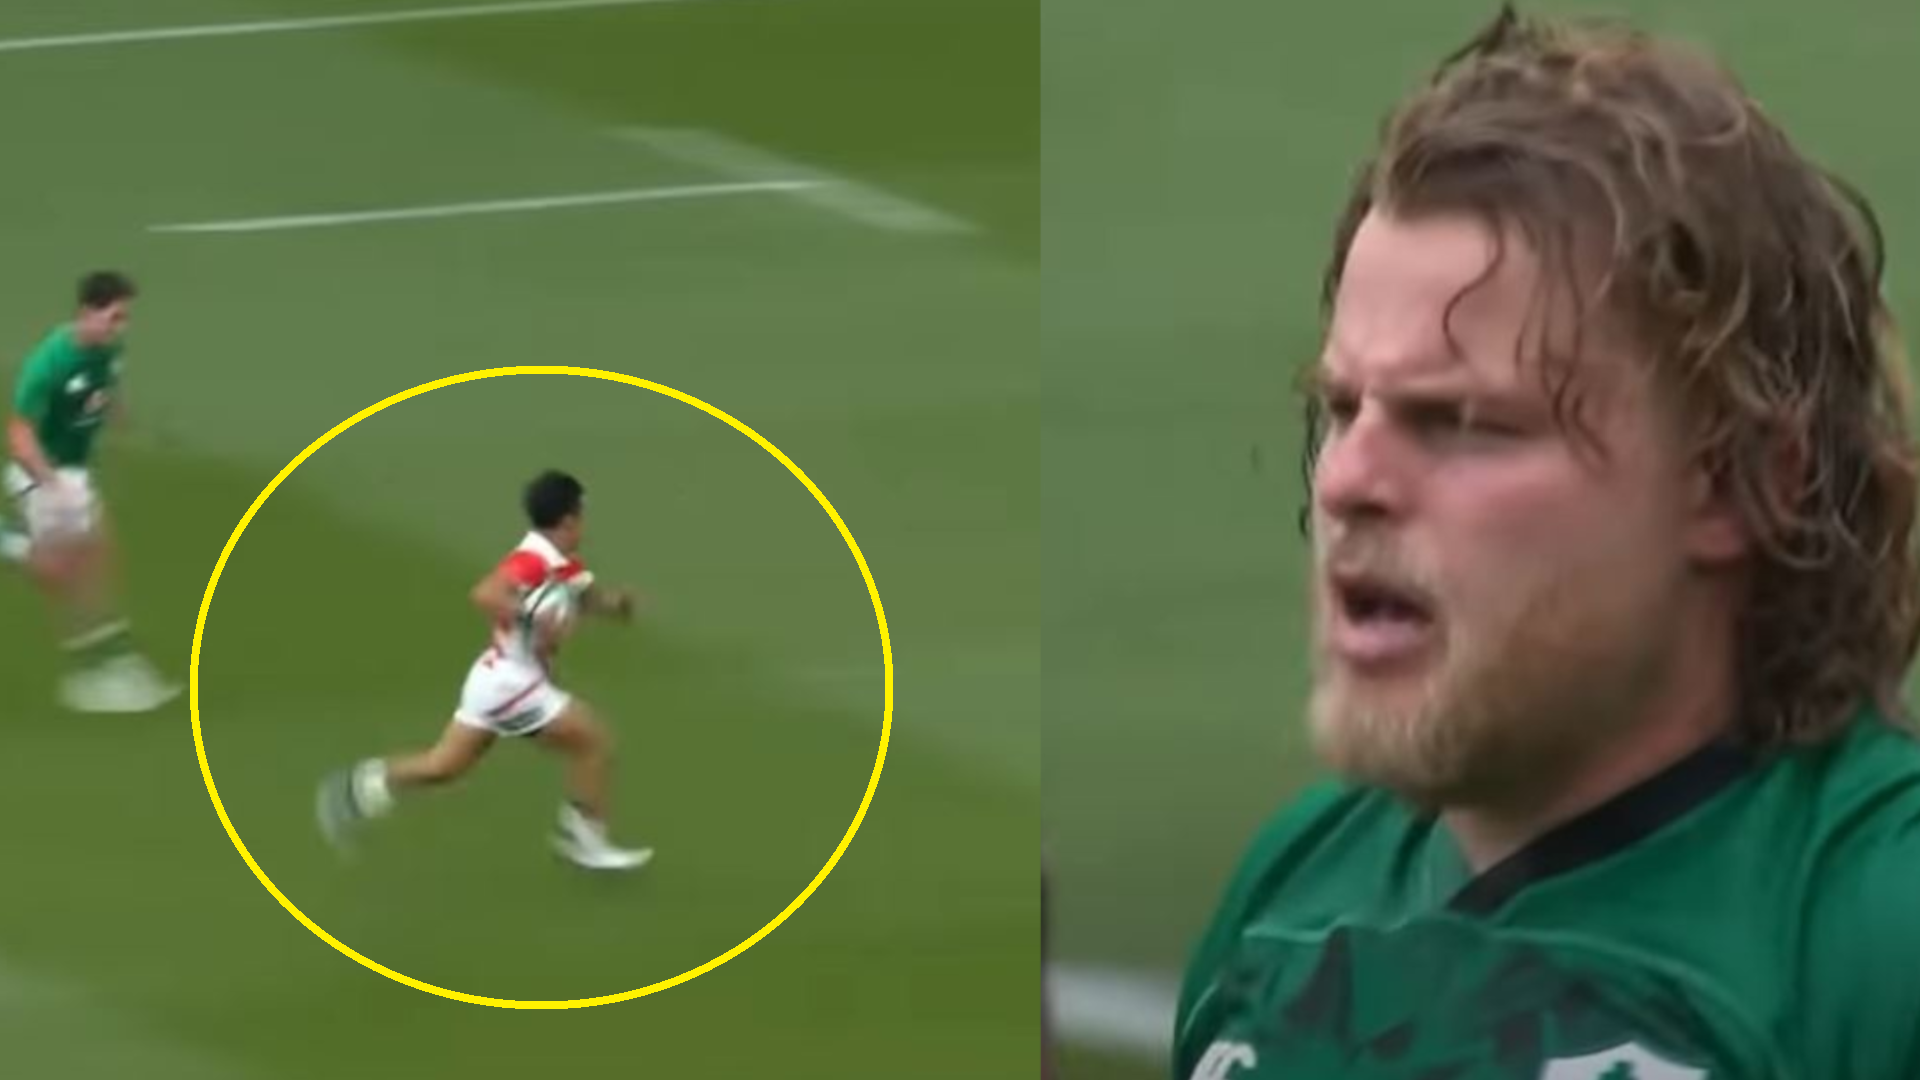 You may have missed it, but Ireland Japan was an absolute cracker